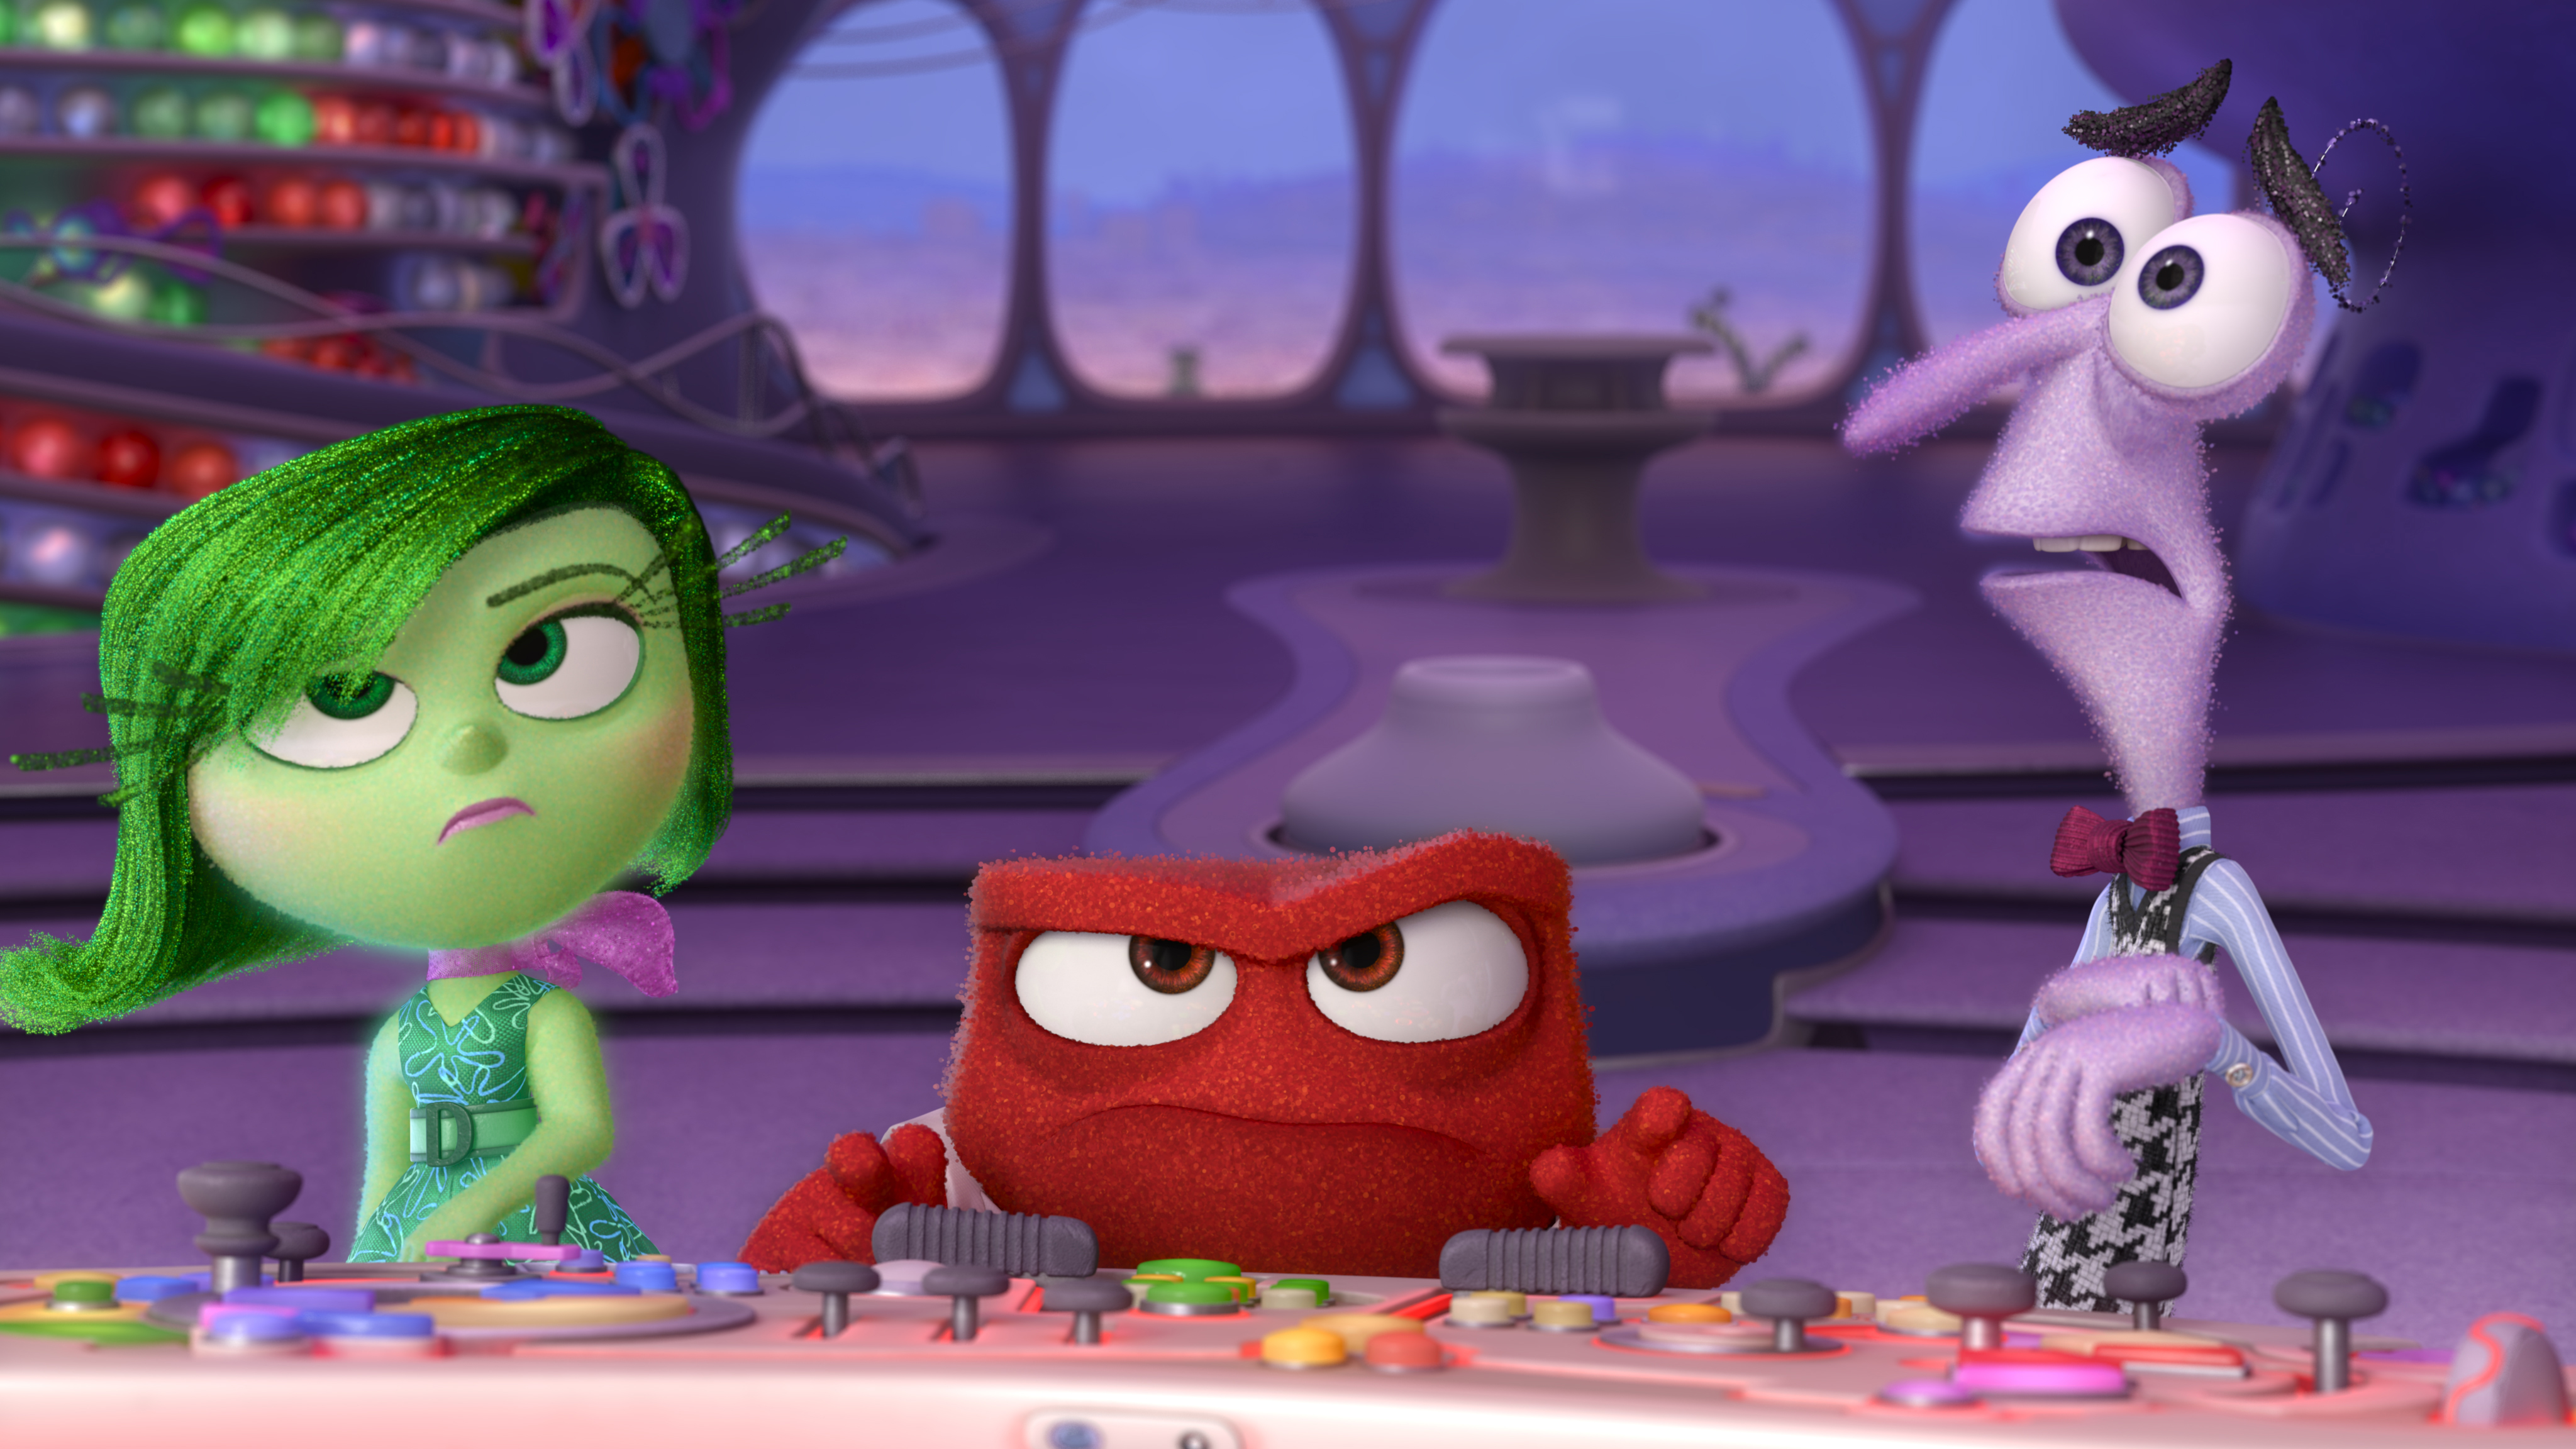 Disgust, Anger and Fear in a still from Inside Out